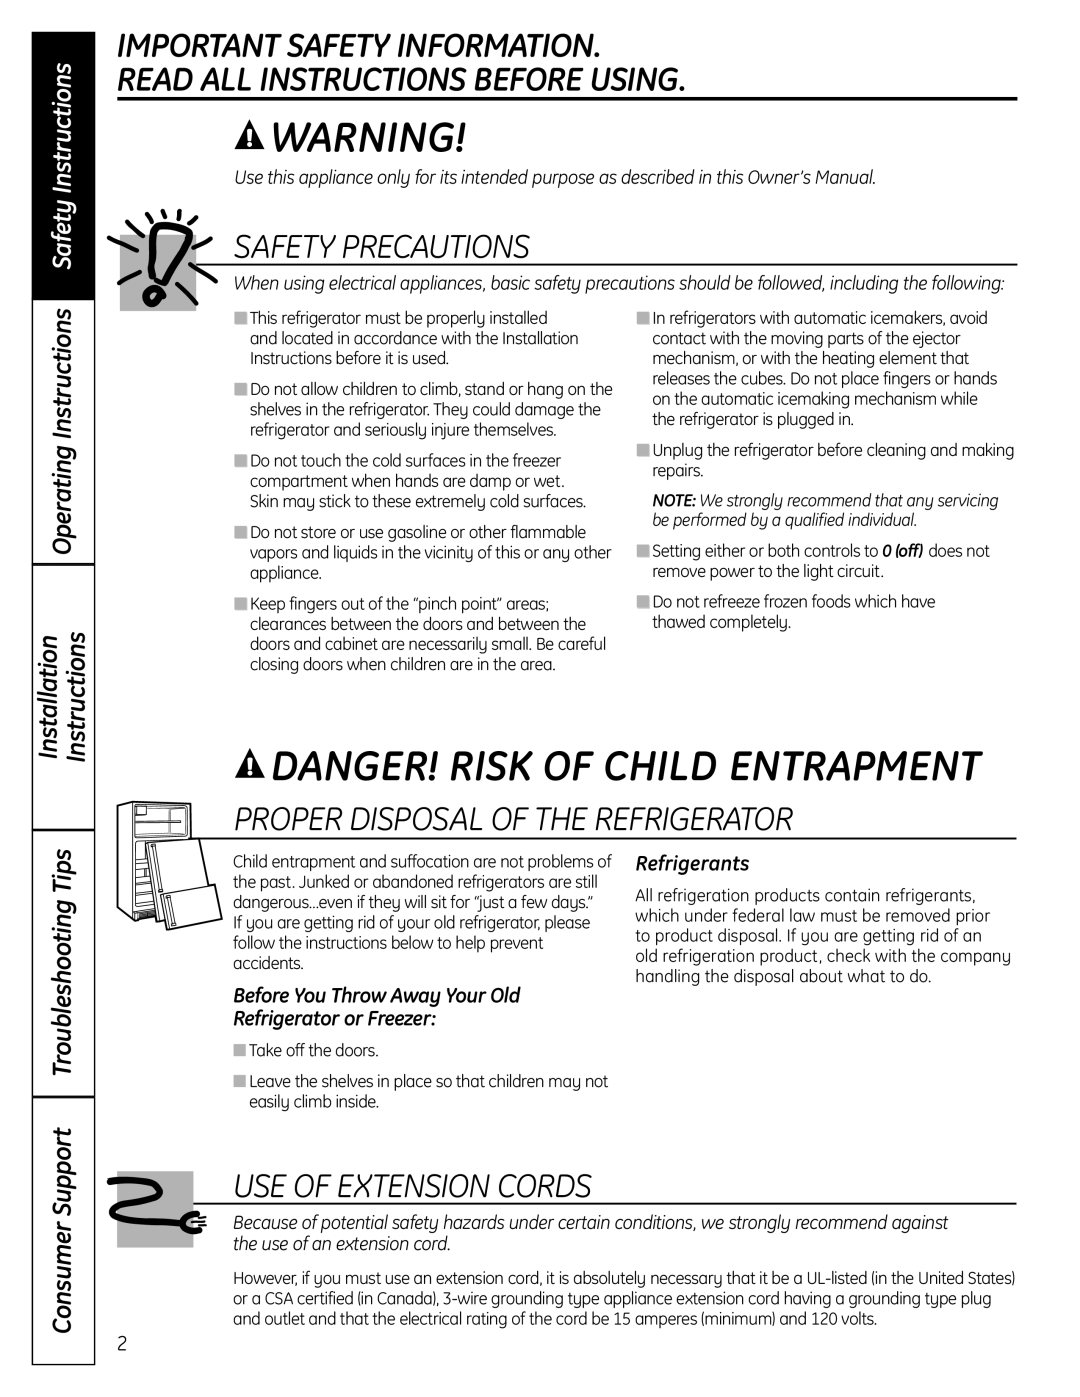 GE 225D1804P001 Danger! Risk Of Child Entrapment, Important Safety Information Read All Instructions Before Using 